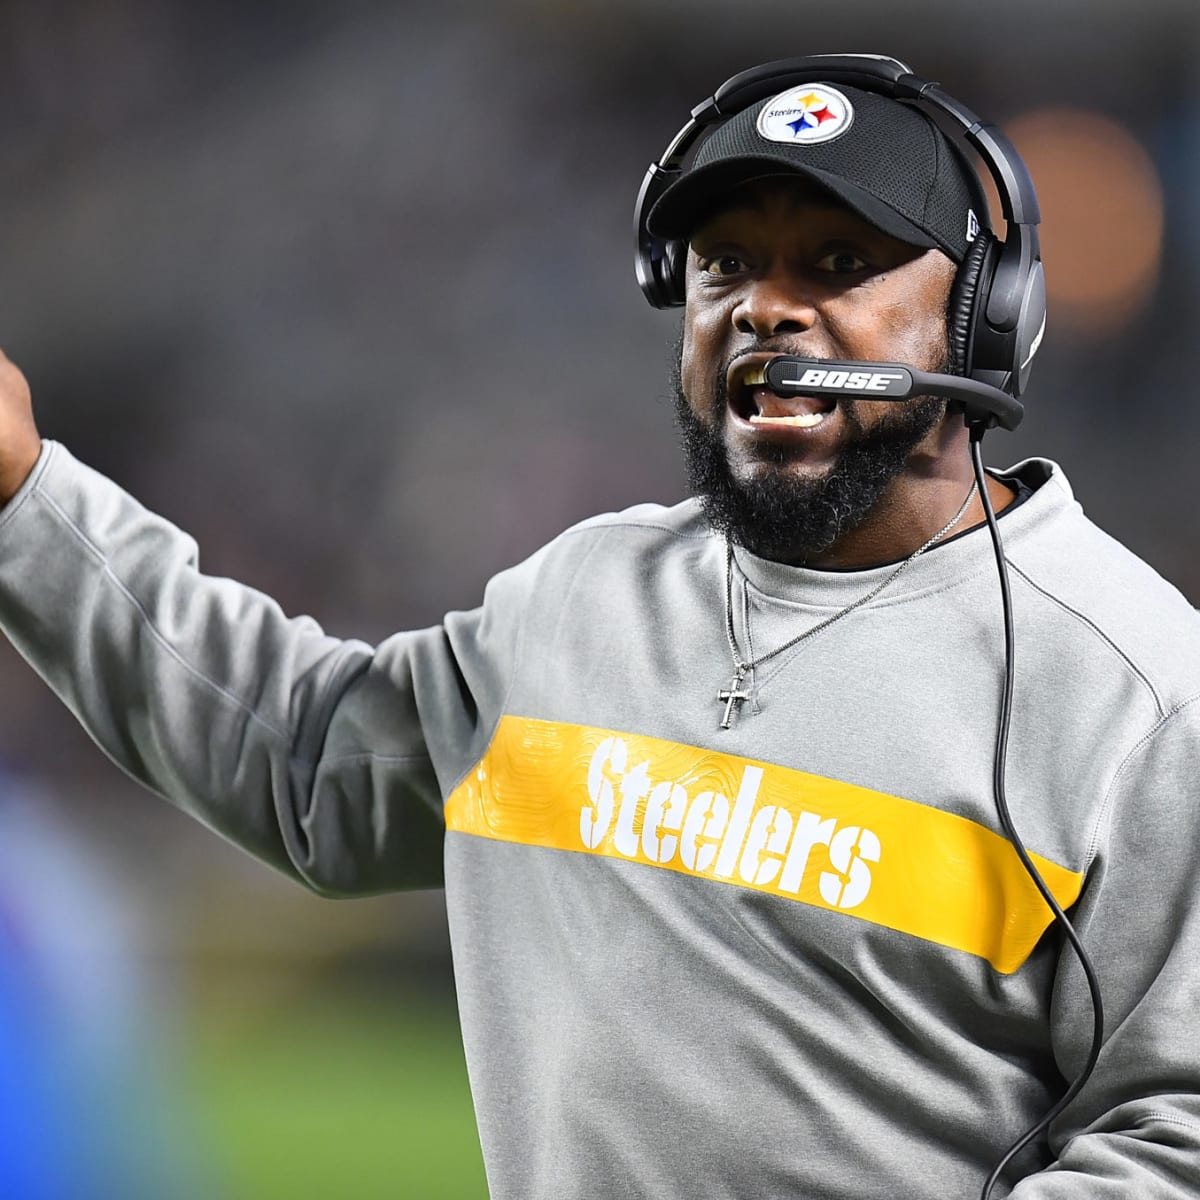 Mike Tomlin says no interest in college football coaching job